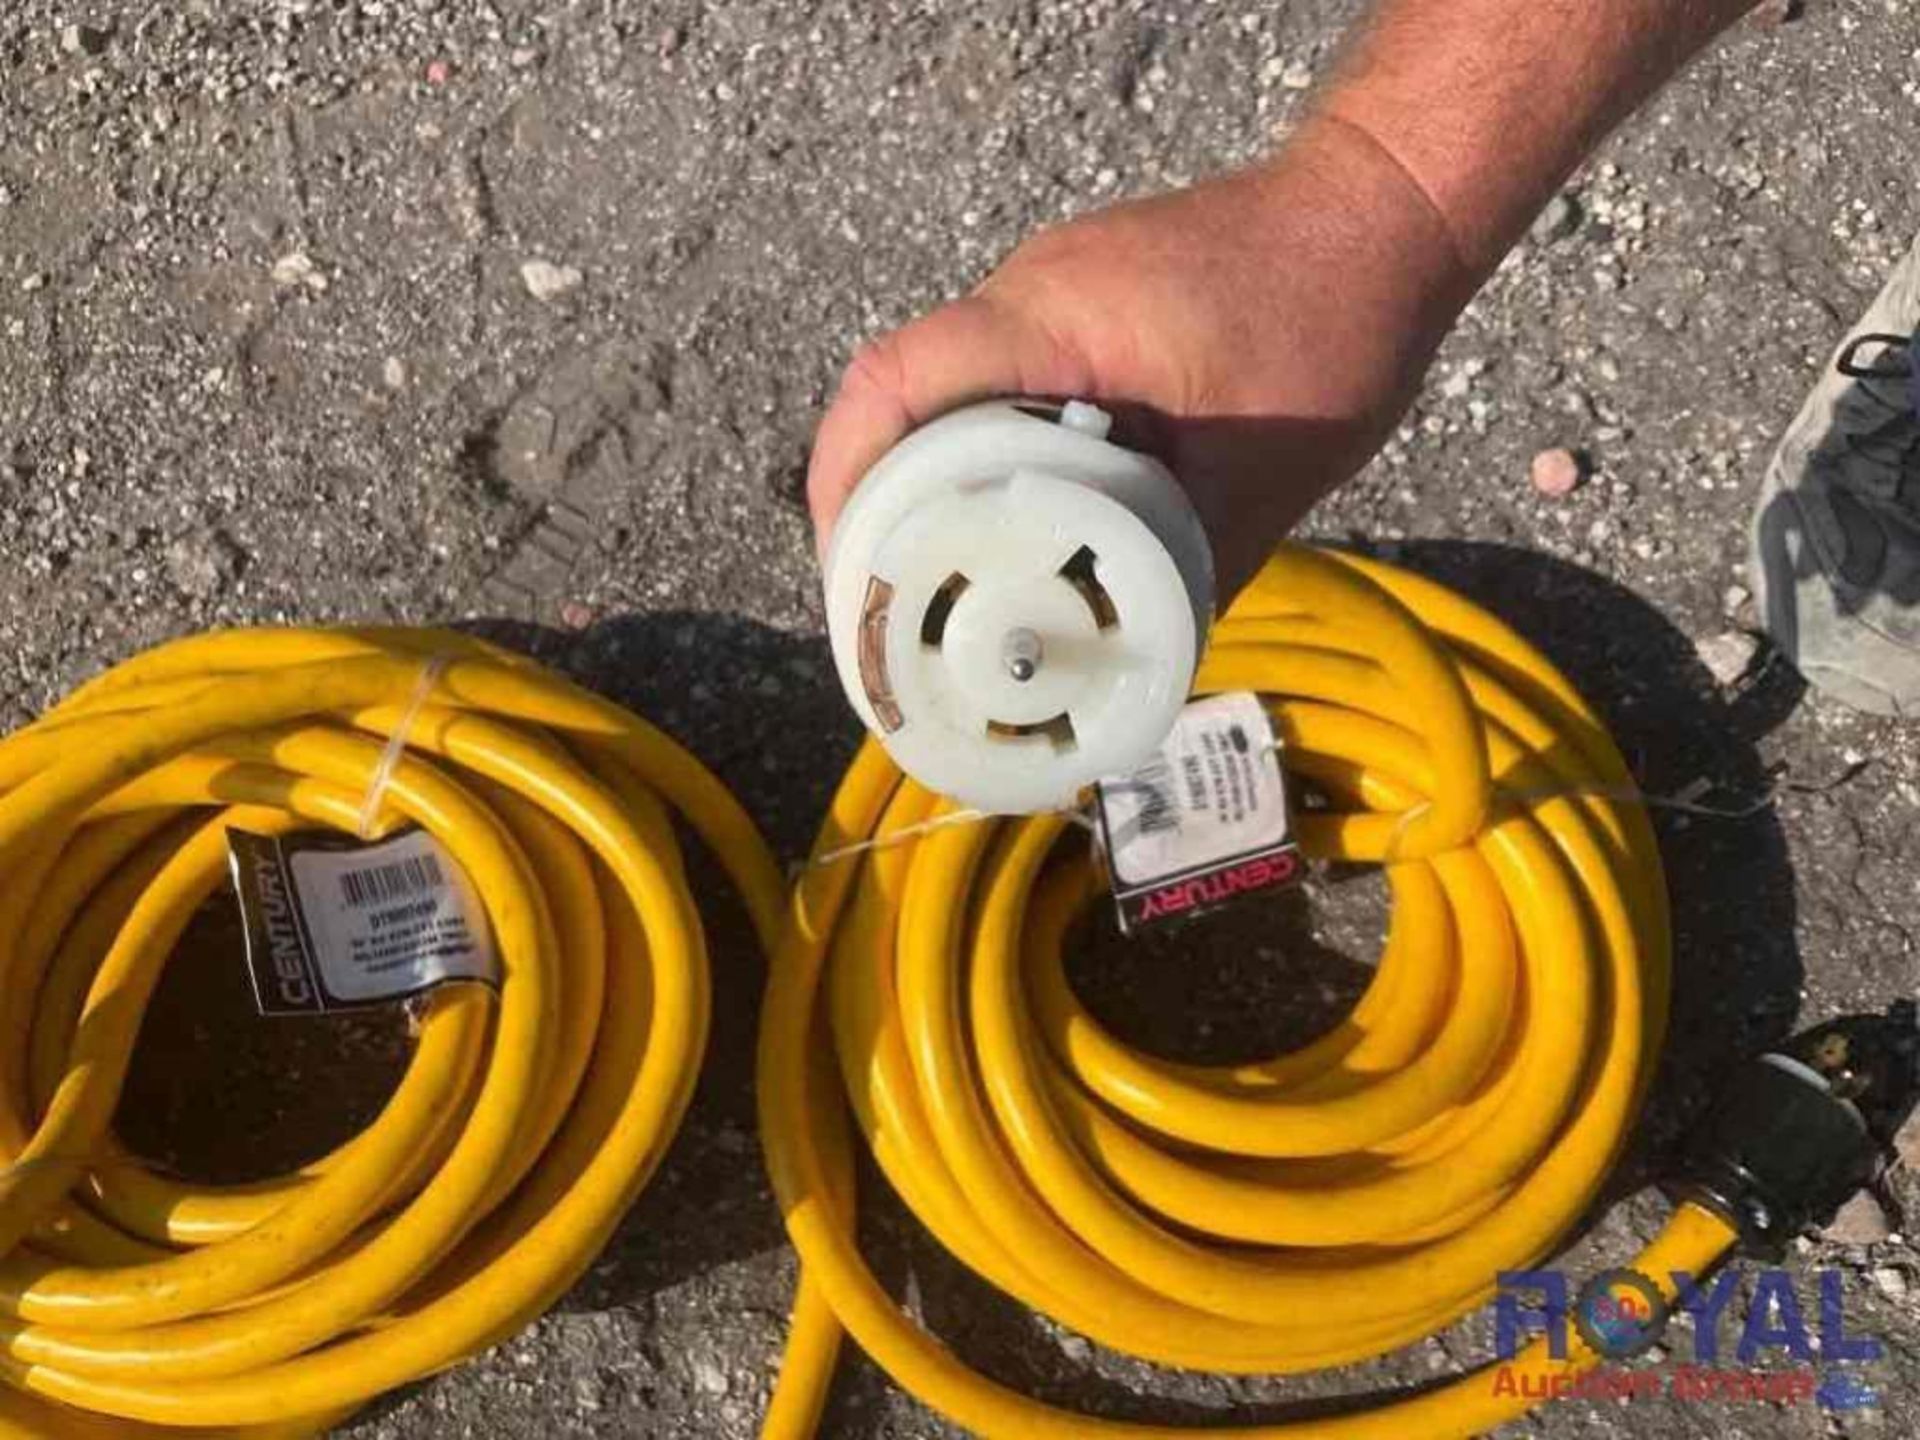 2-Century Wire Power Cords,Yellow, 50' 8/4 Cable - Image 6 of 7